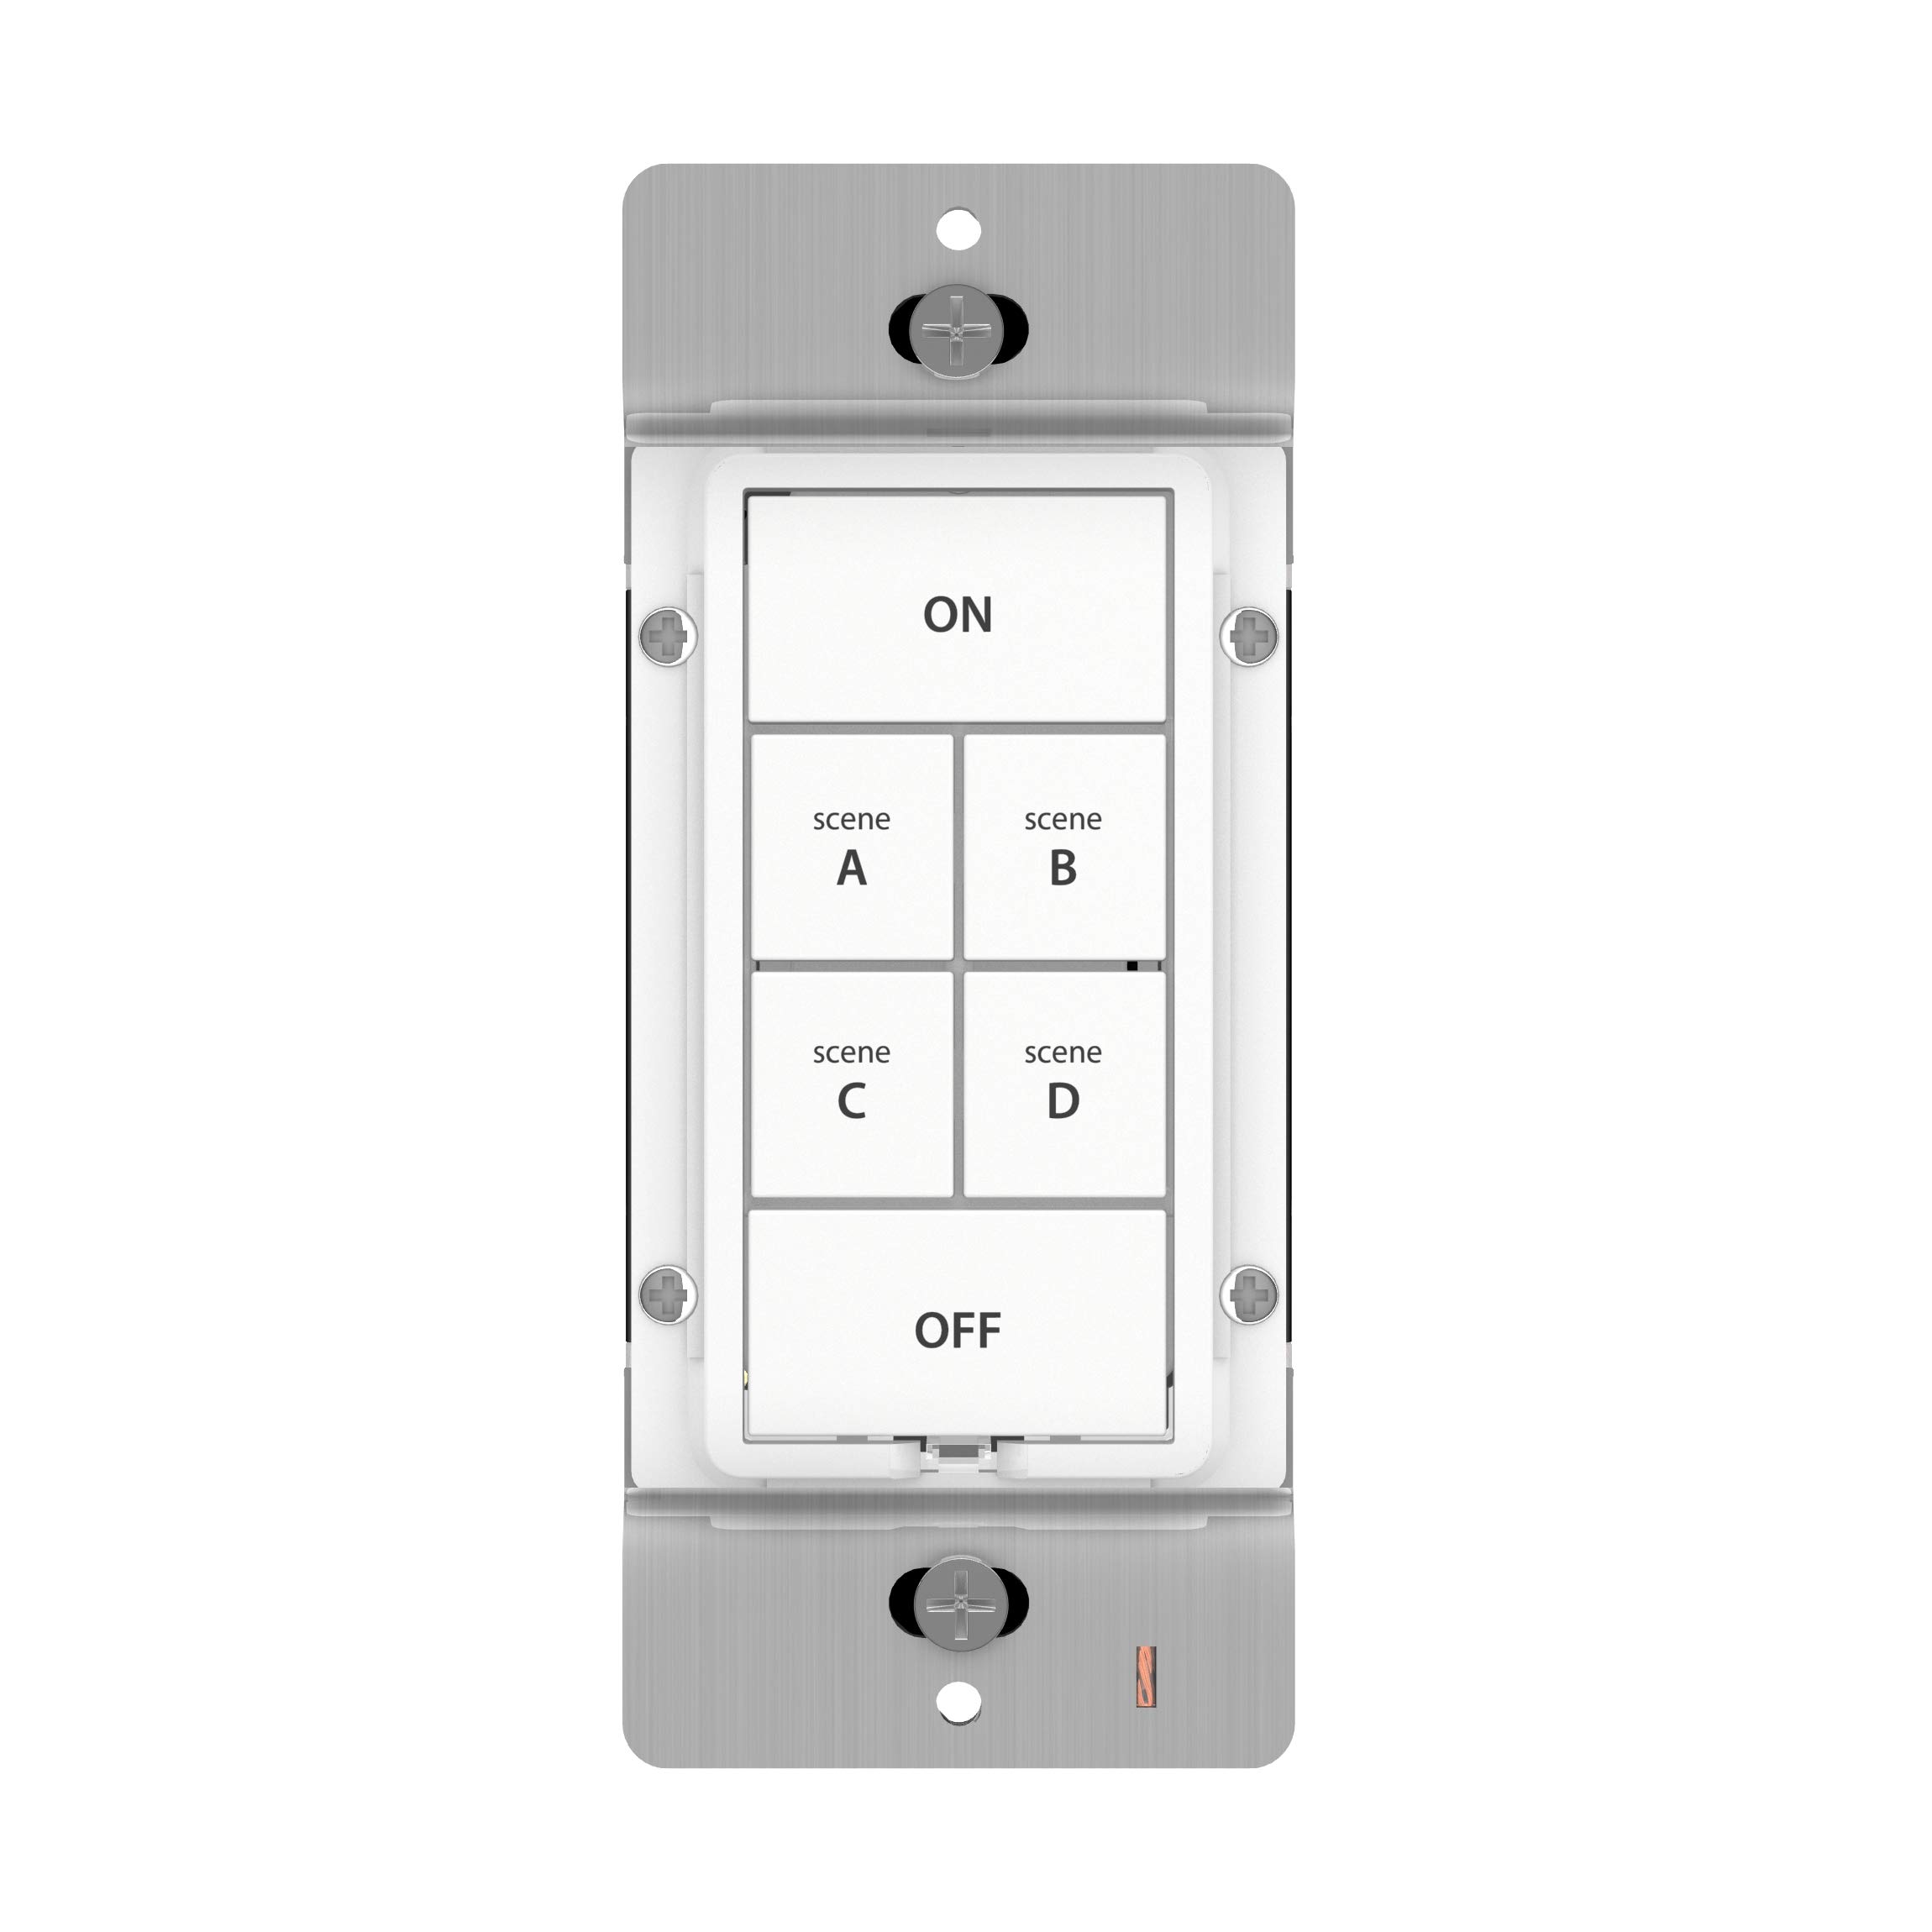 Insteon Smart Dimmer 6-Button Keypad, KeypadLinc In-Wall Controller, 2334-232 (White) - Insteon Hub required for voice control with Alexa & Google Assistant